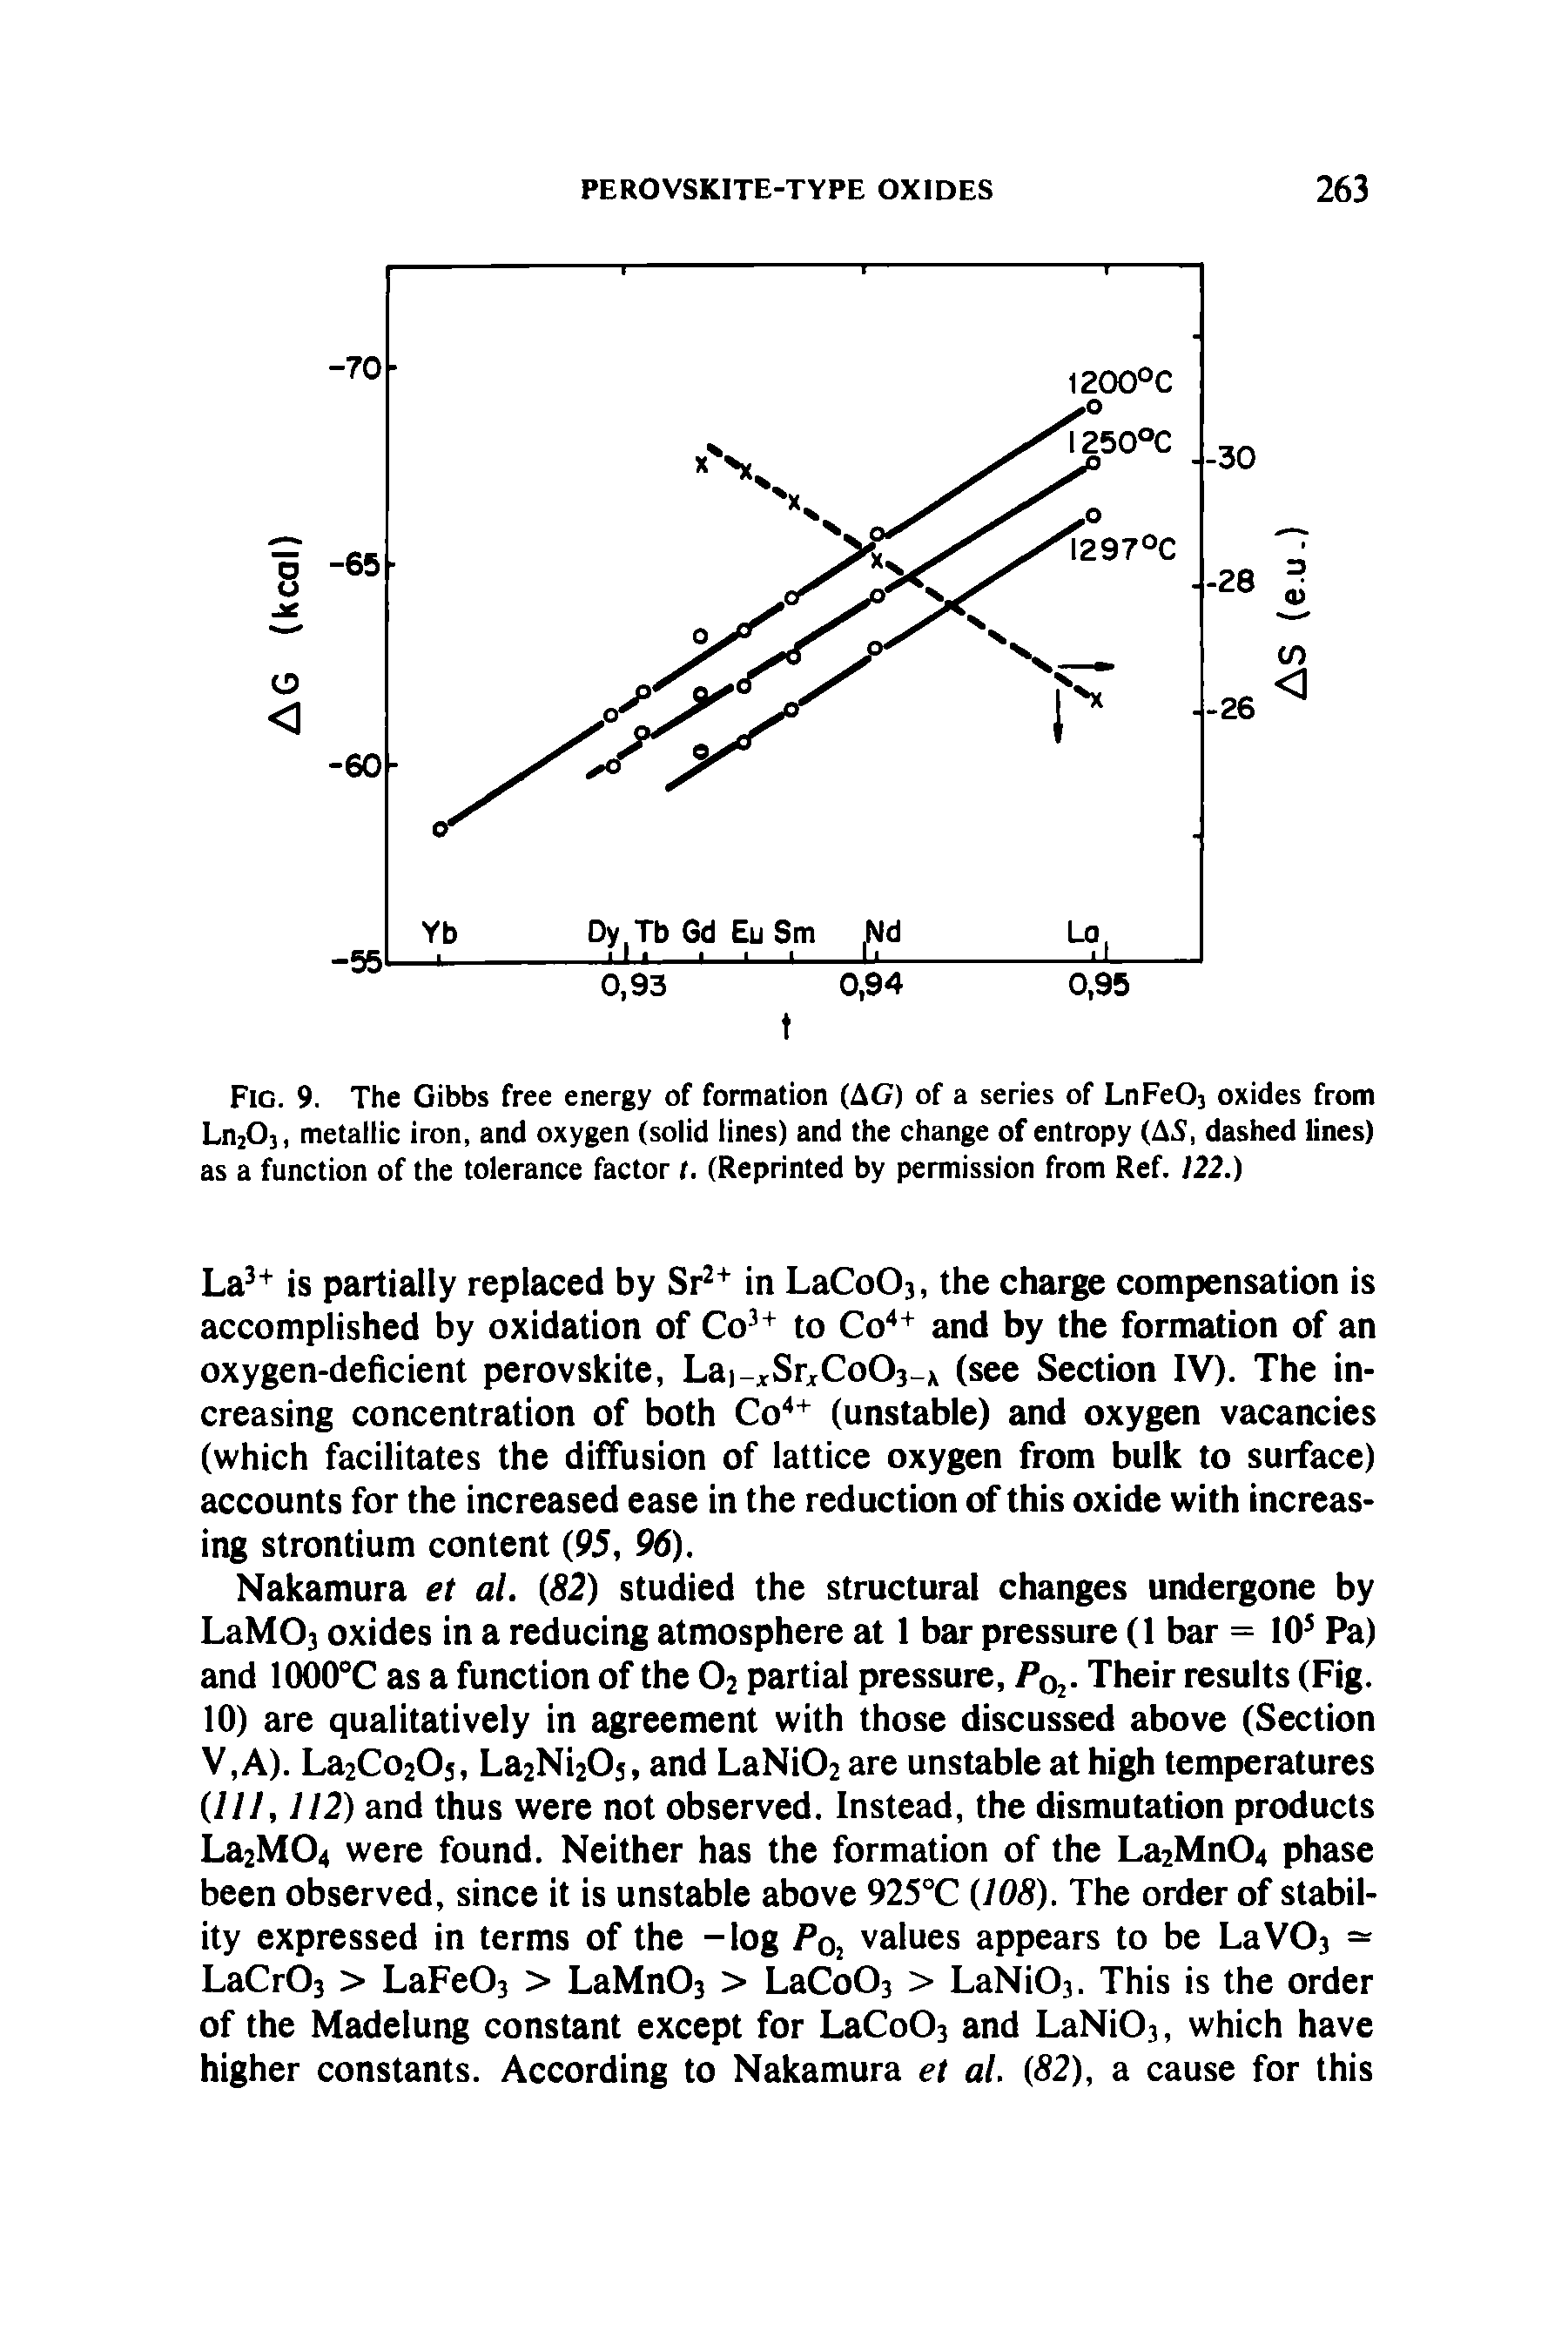 Fig. 9. The Gibbs free energy of formation (AG) of a series of LnFe03 oxides from Ln203, metallic iron, and oxygen (solid lines) and the change of entropy (AS, dashed lines) as a function of the tolerance factor t. (Reprinted by permission from Ref. 122.)...